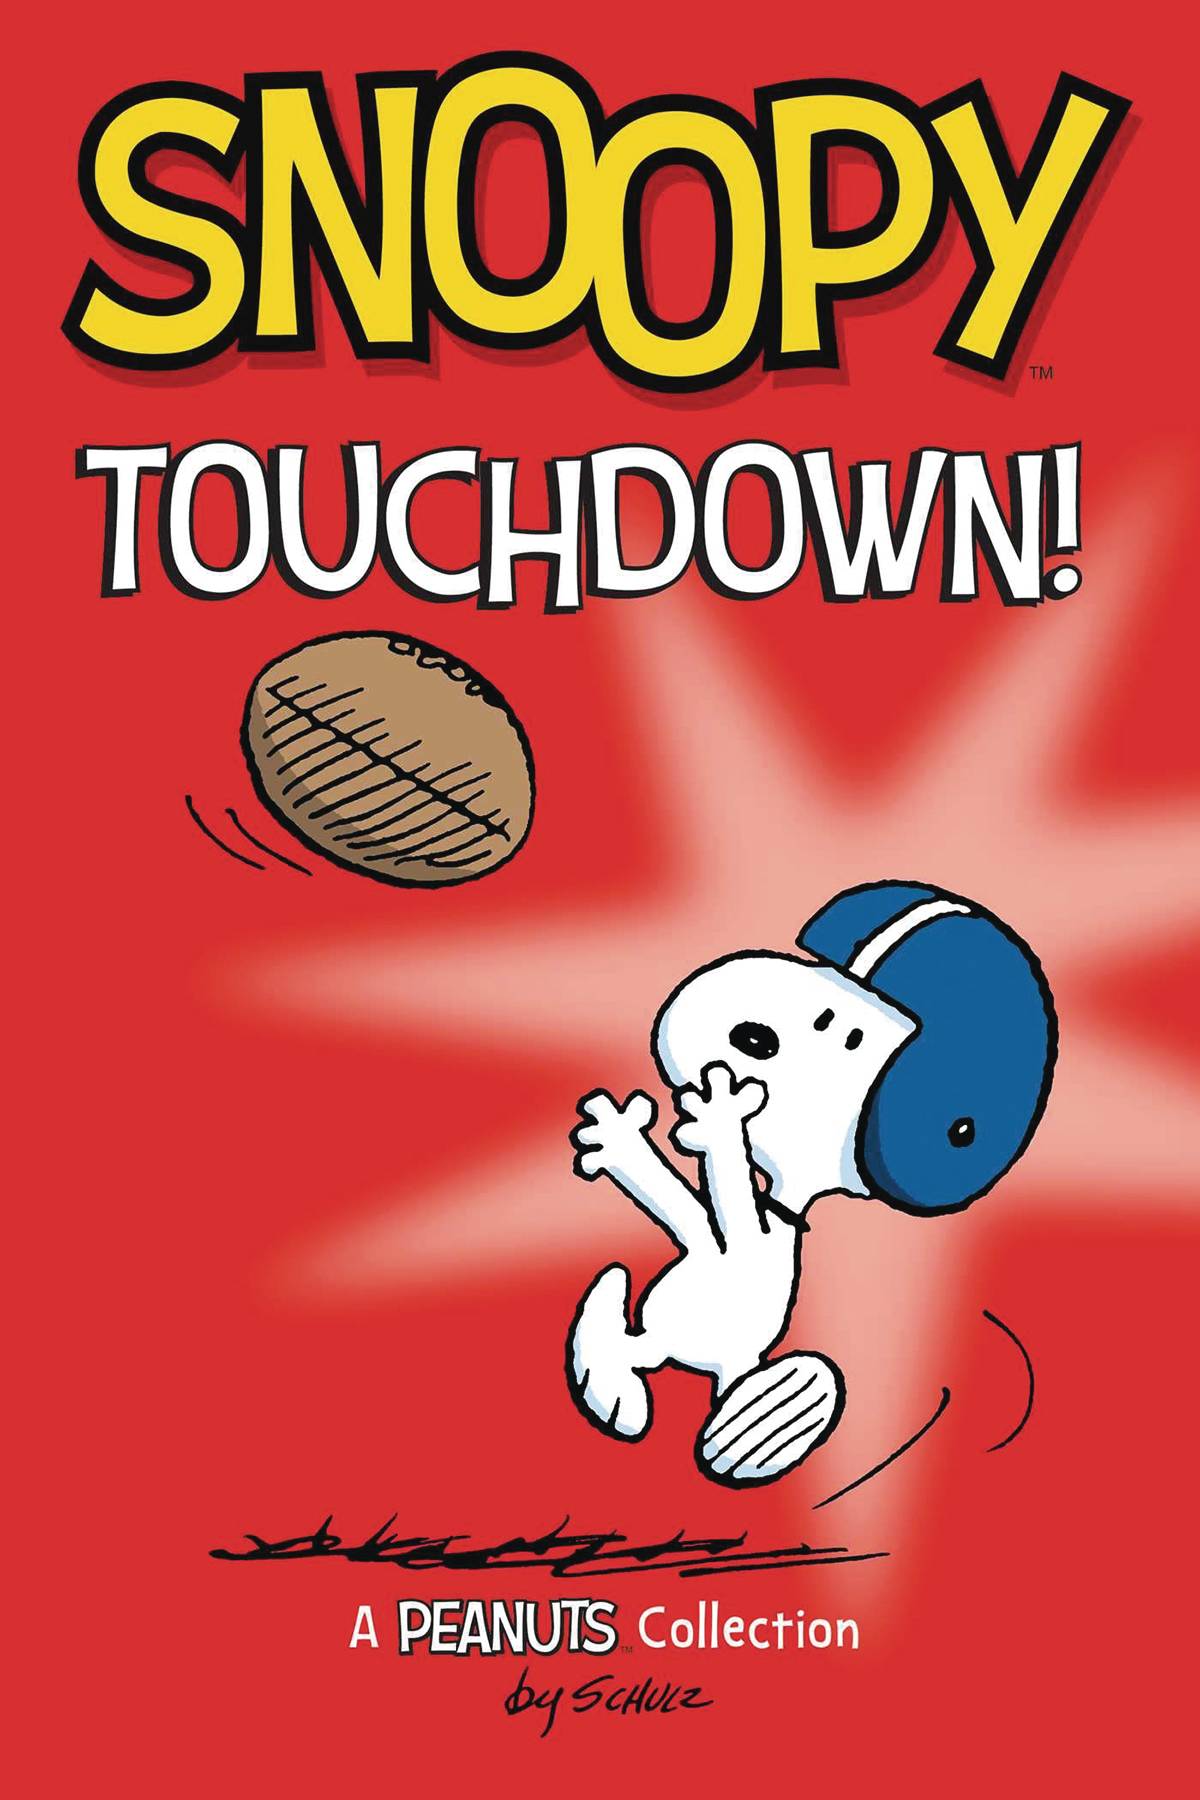 PEANUTS TP SNOOPY TOUCHDOWN